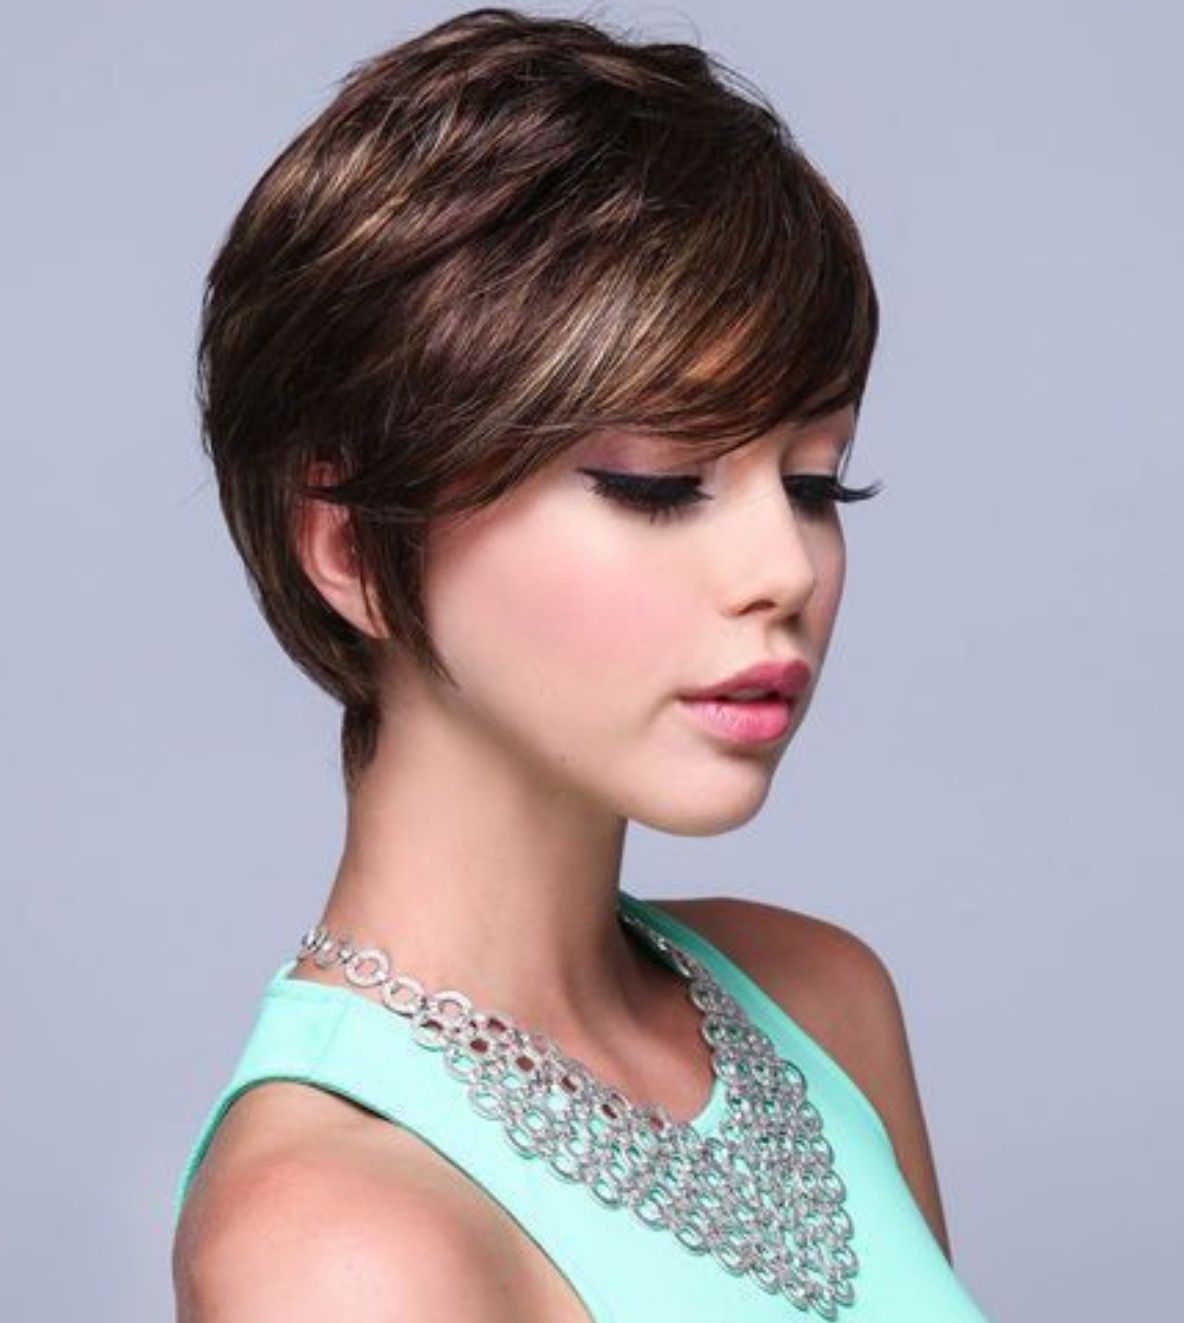 Very Cute Long Pixie Cut | Things That Catch My Eye | Pinterest Intended For Most Popular Long Pixie Hairstyles (Photo 12 of 15)